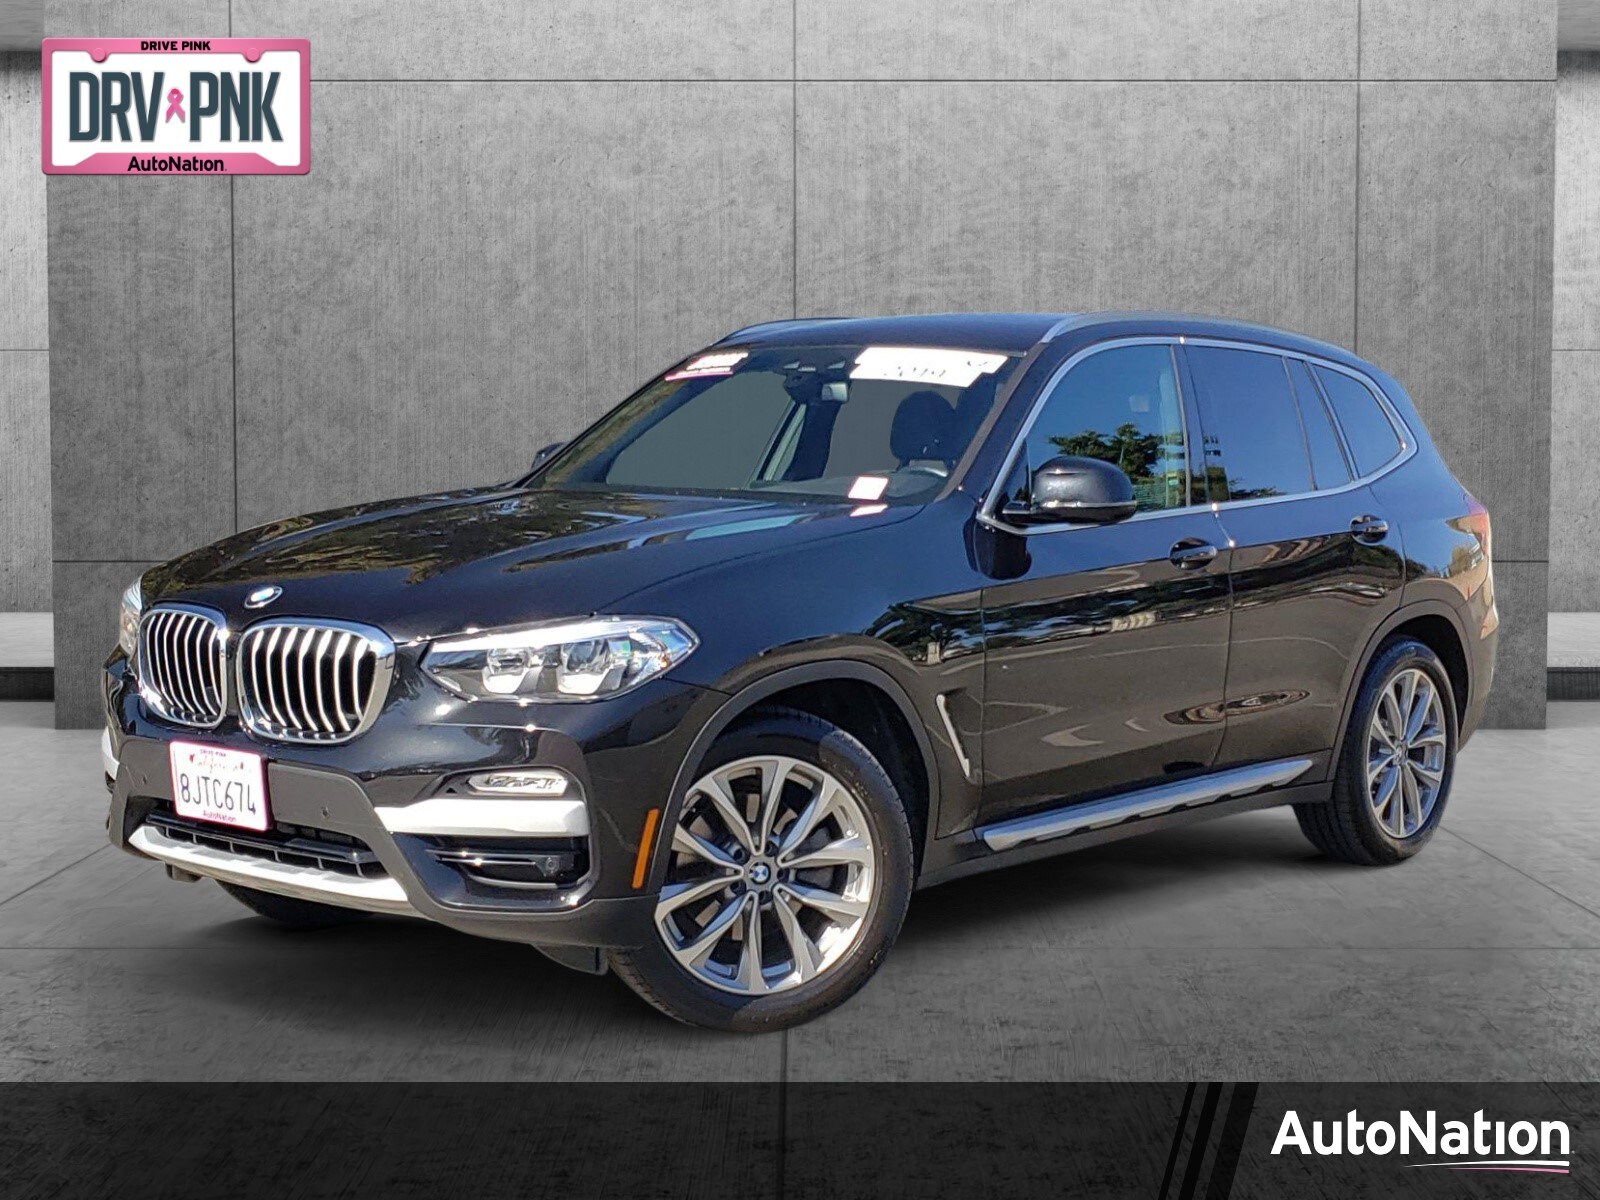 Used Bmw X3 Mountain View Ca